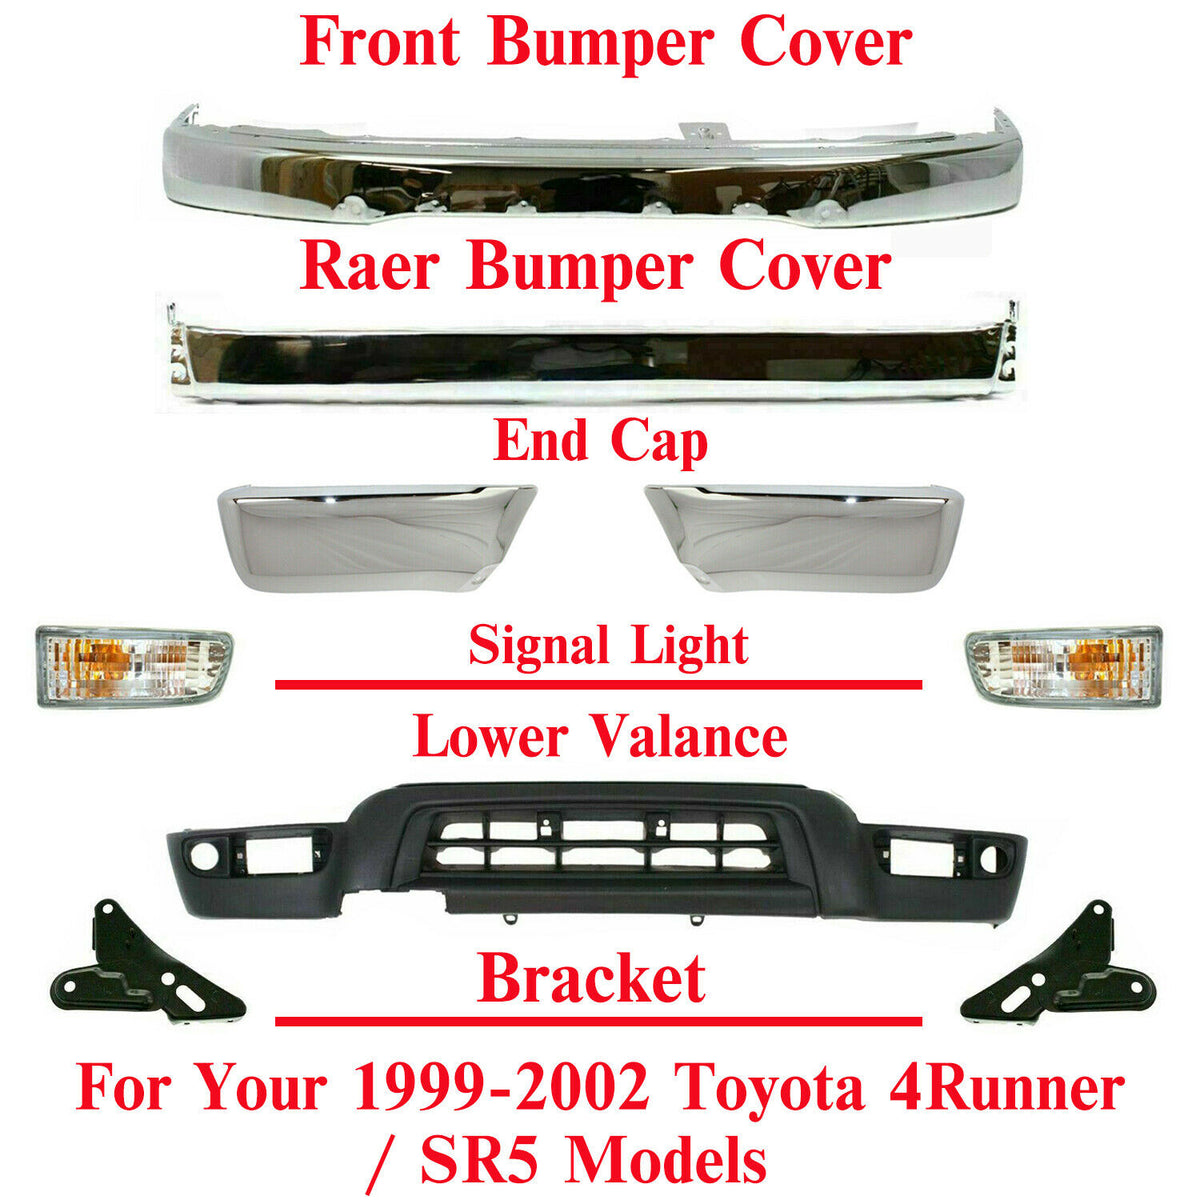 Front & Rear Bumper Kit With End Cap Chrome + Valance For 1999-02 Toyota  4Runner